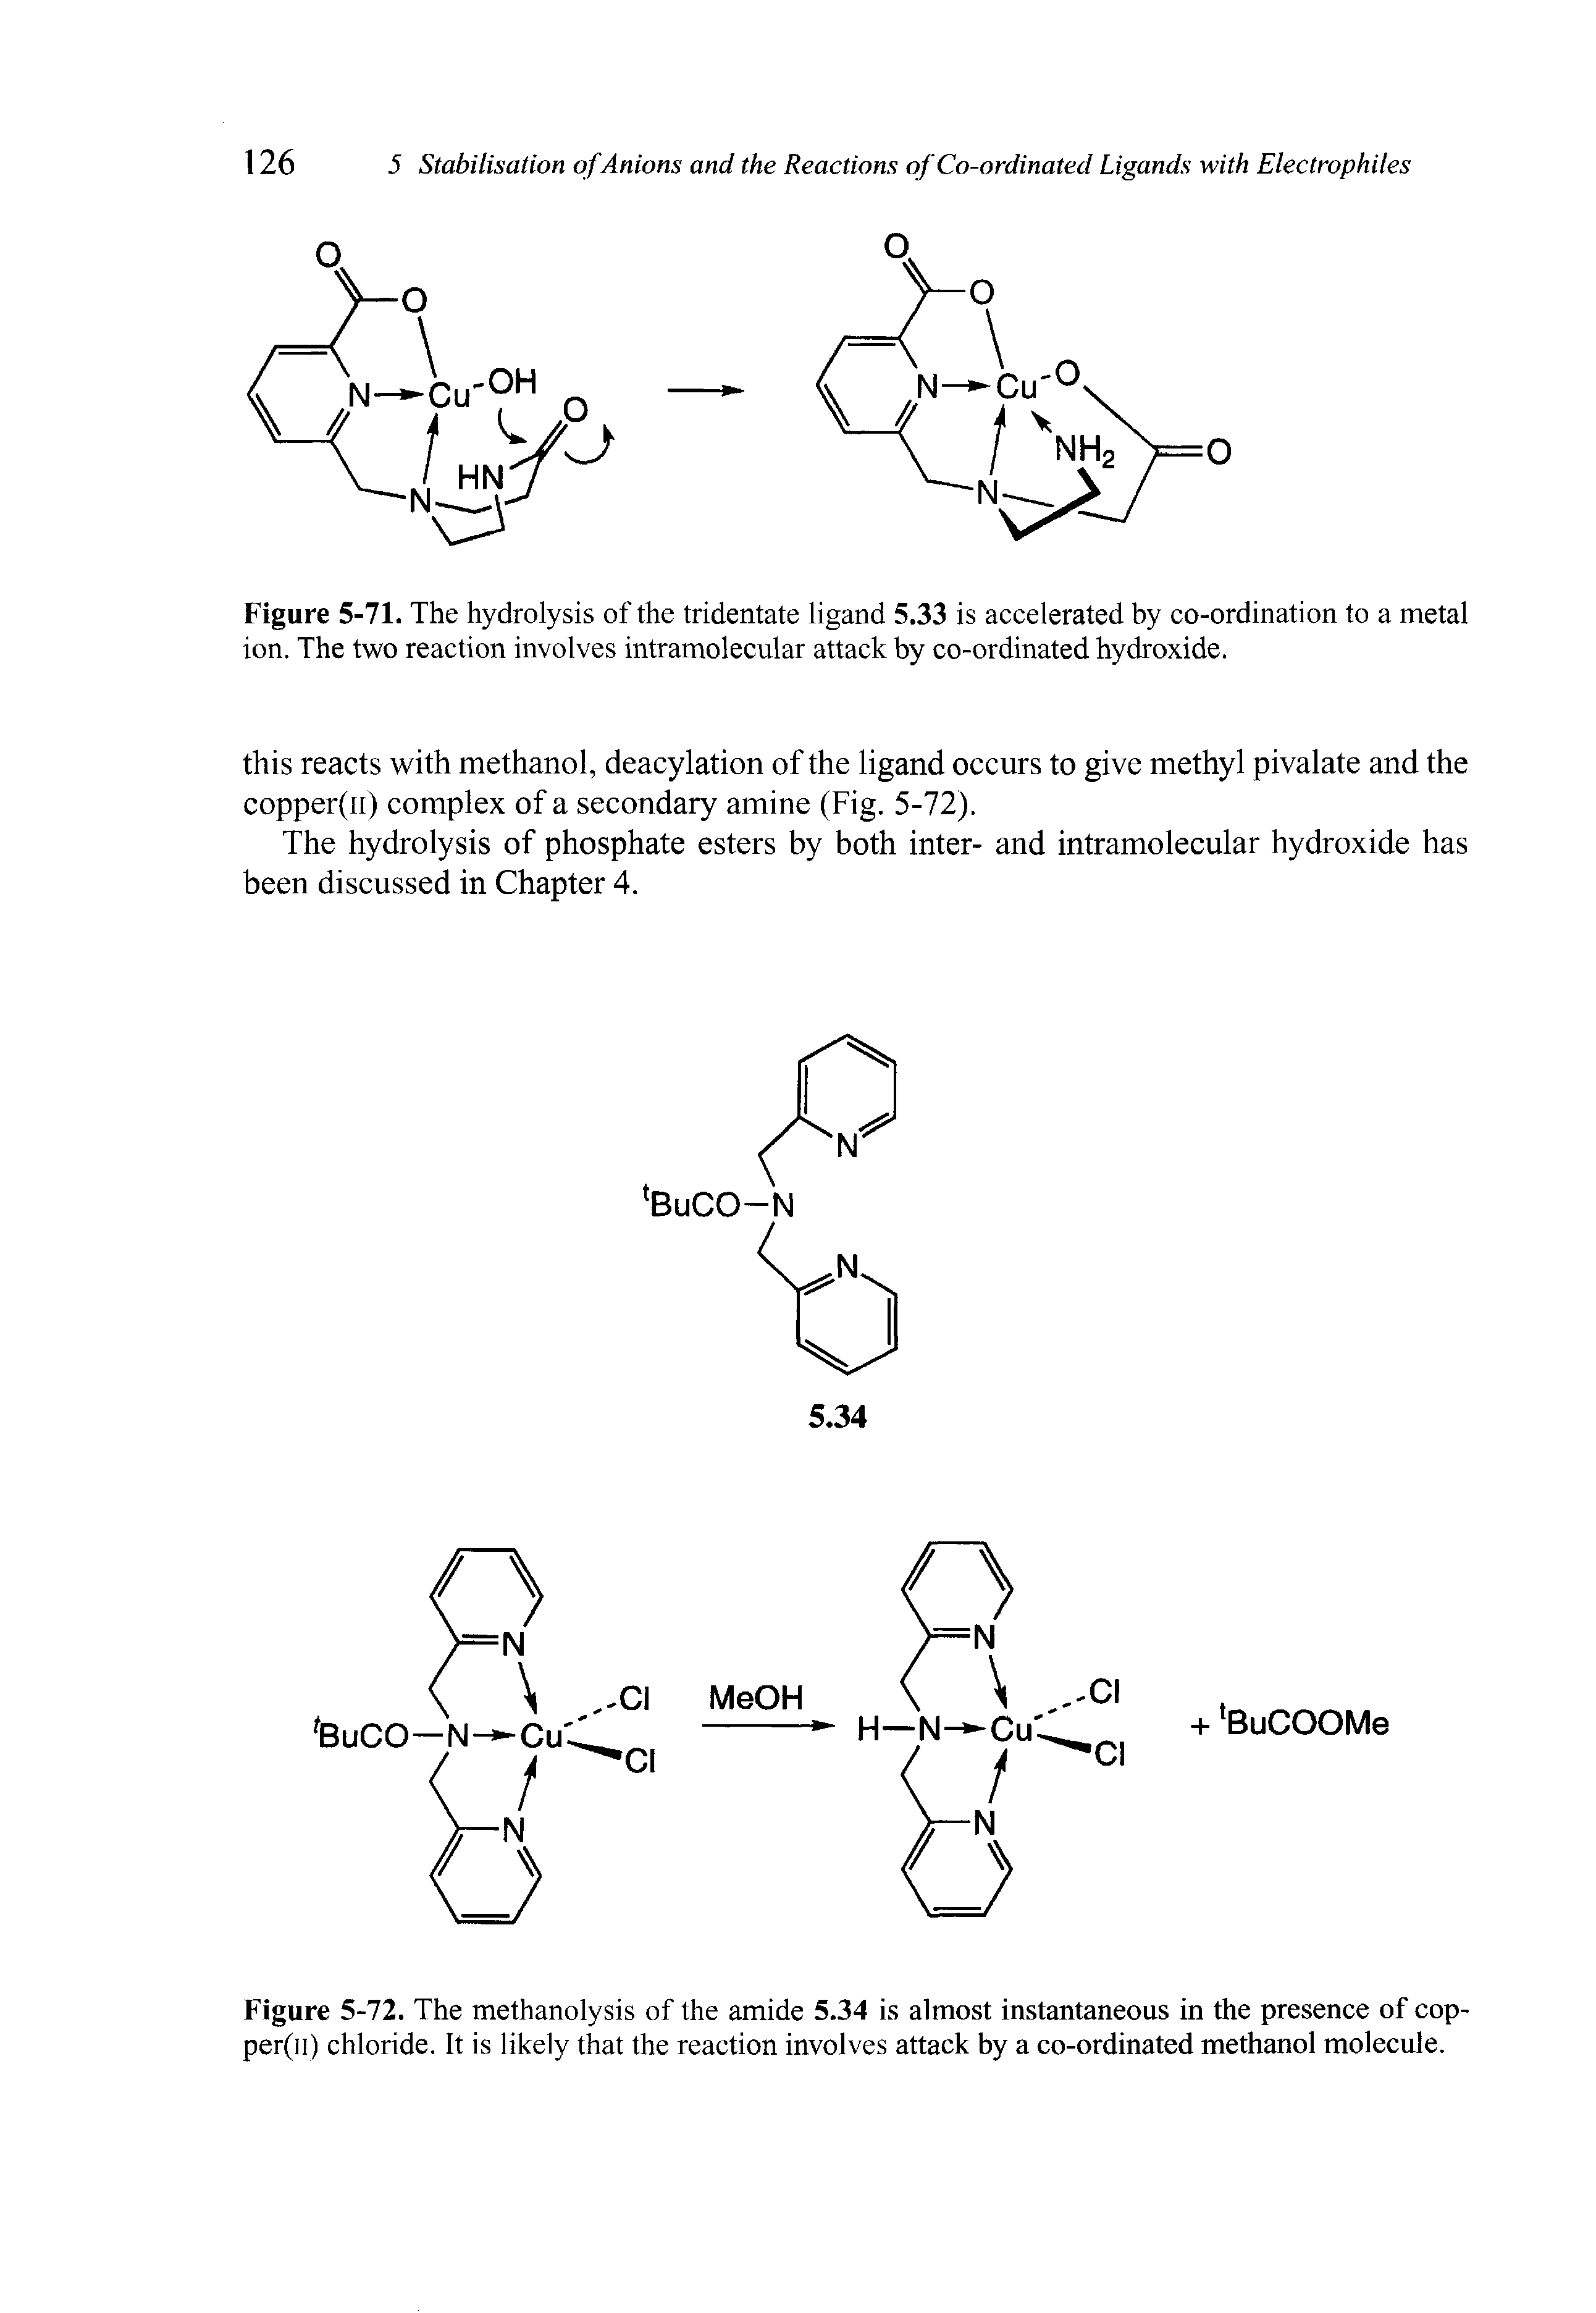 Figure 5-71. The hydrolysis of the tridentate ligand 5.33 is accelerated by co-ordination to a metal ion. The two reaction involves intramolecular attack by co-ordinated hydroxide.